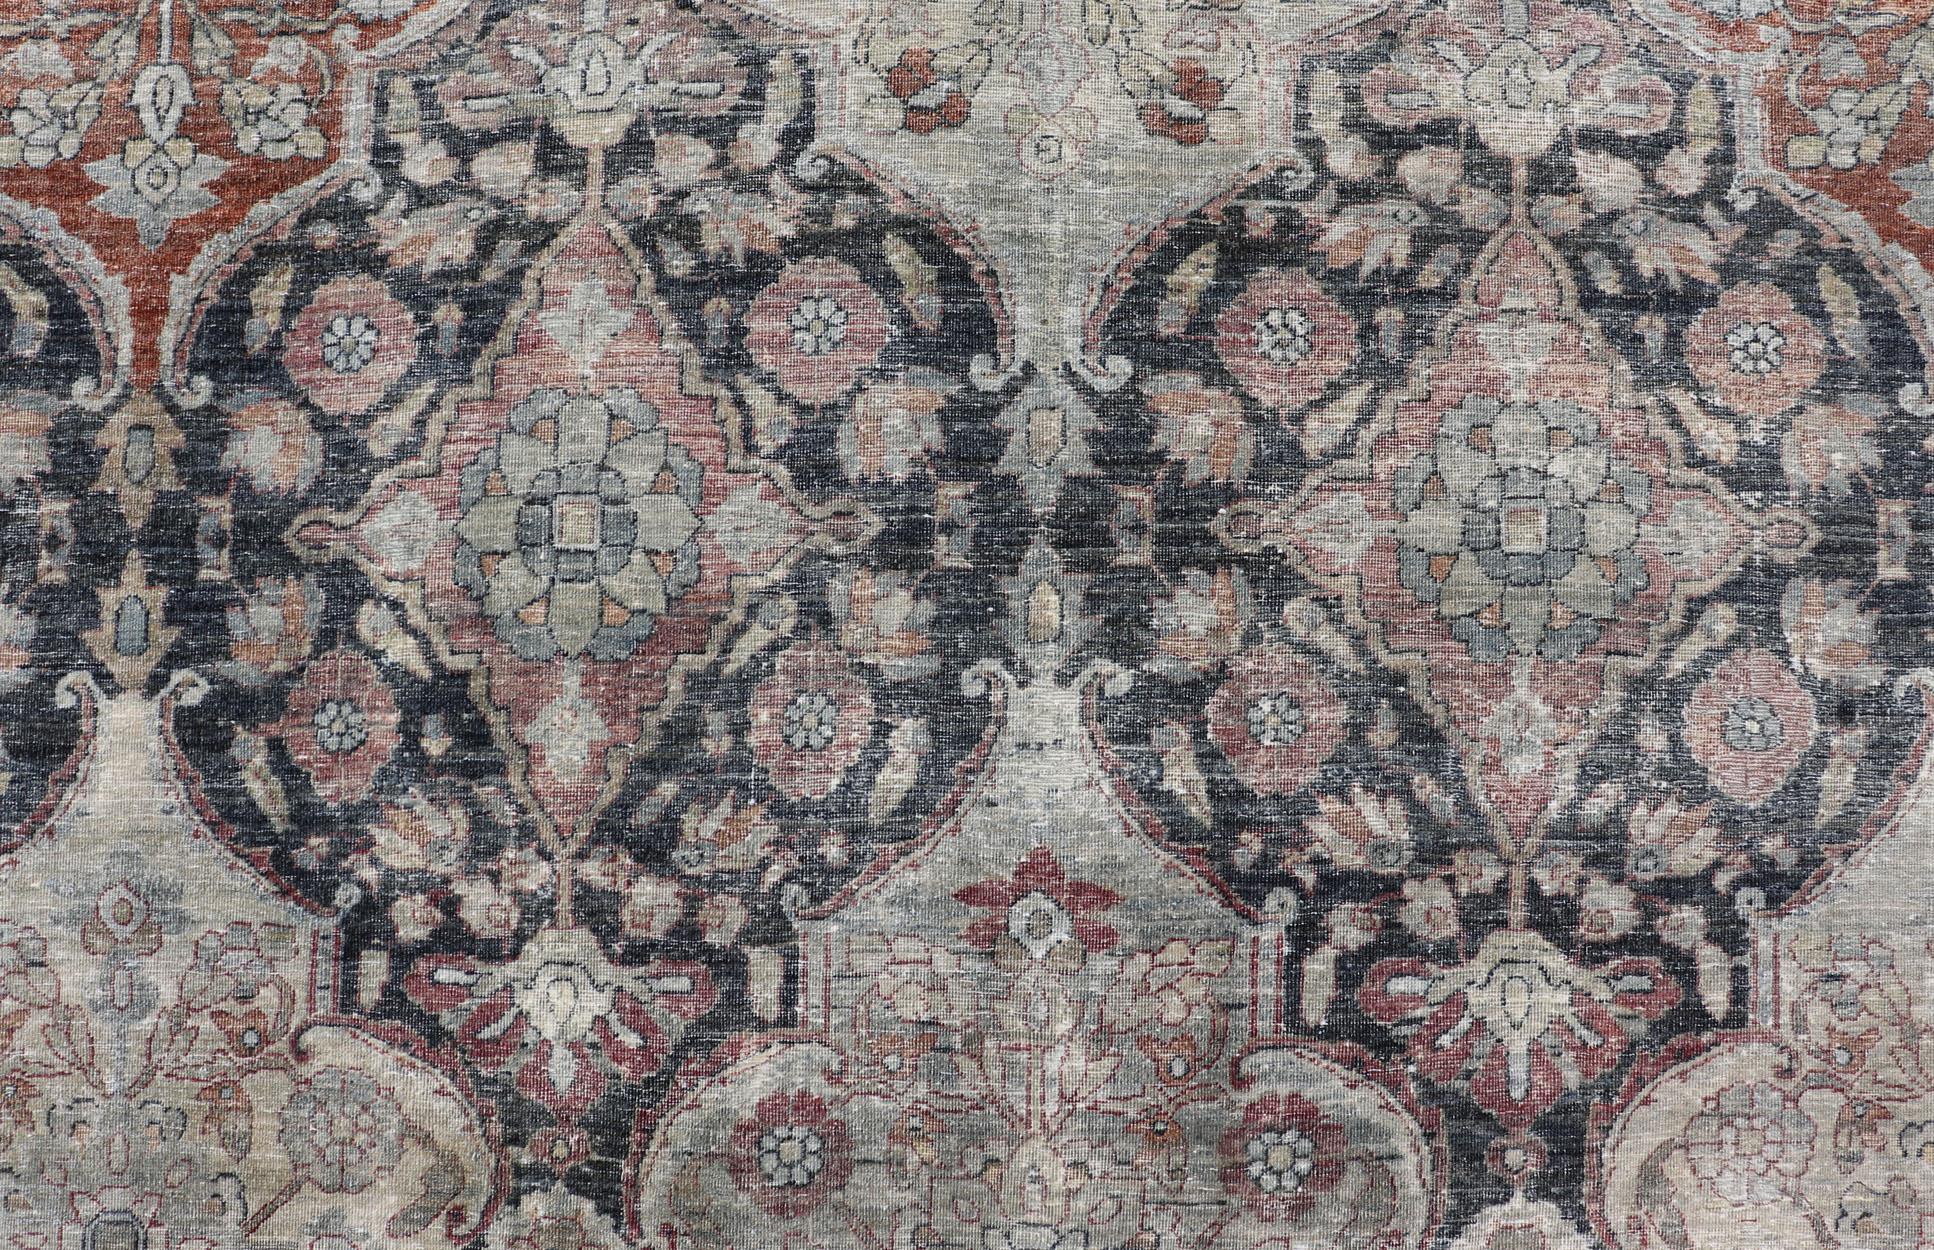 Antique Destressed Persian Yazd Rug in Charcoal, Copper, Warm Gray, Taupe & Rose For Sale 2